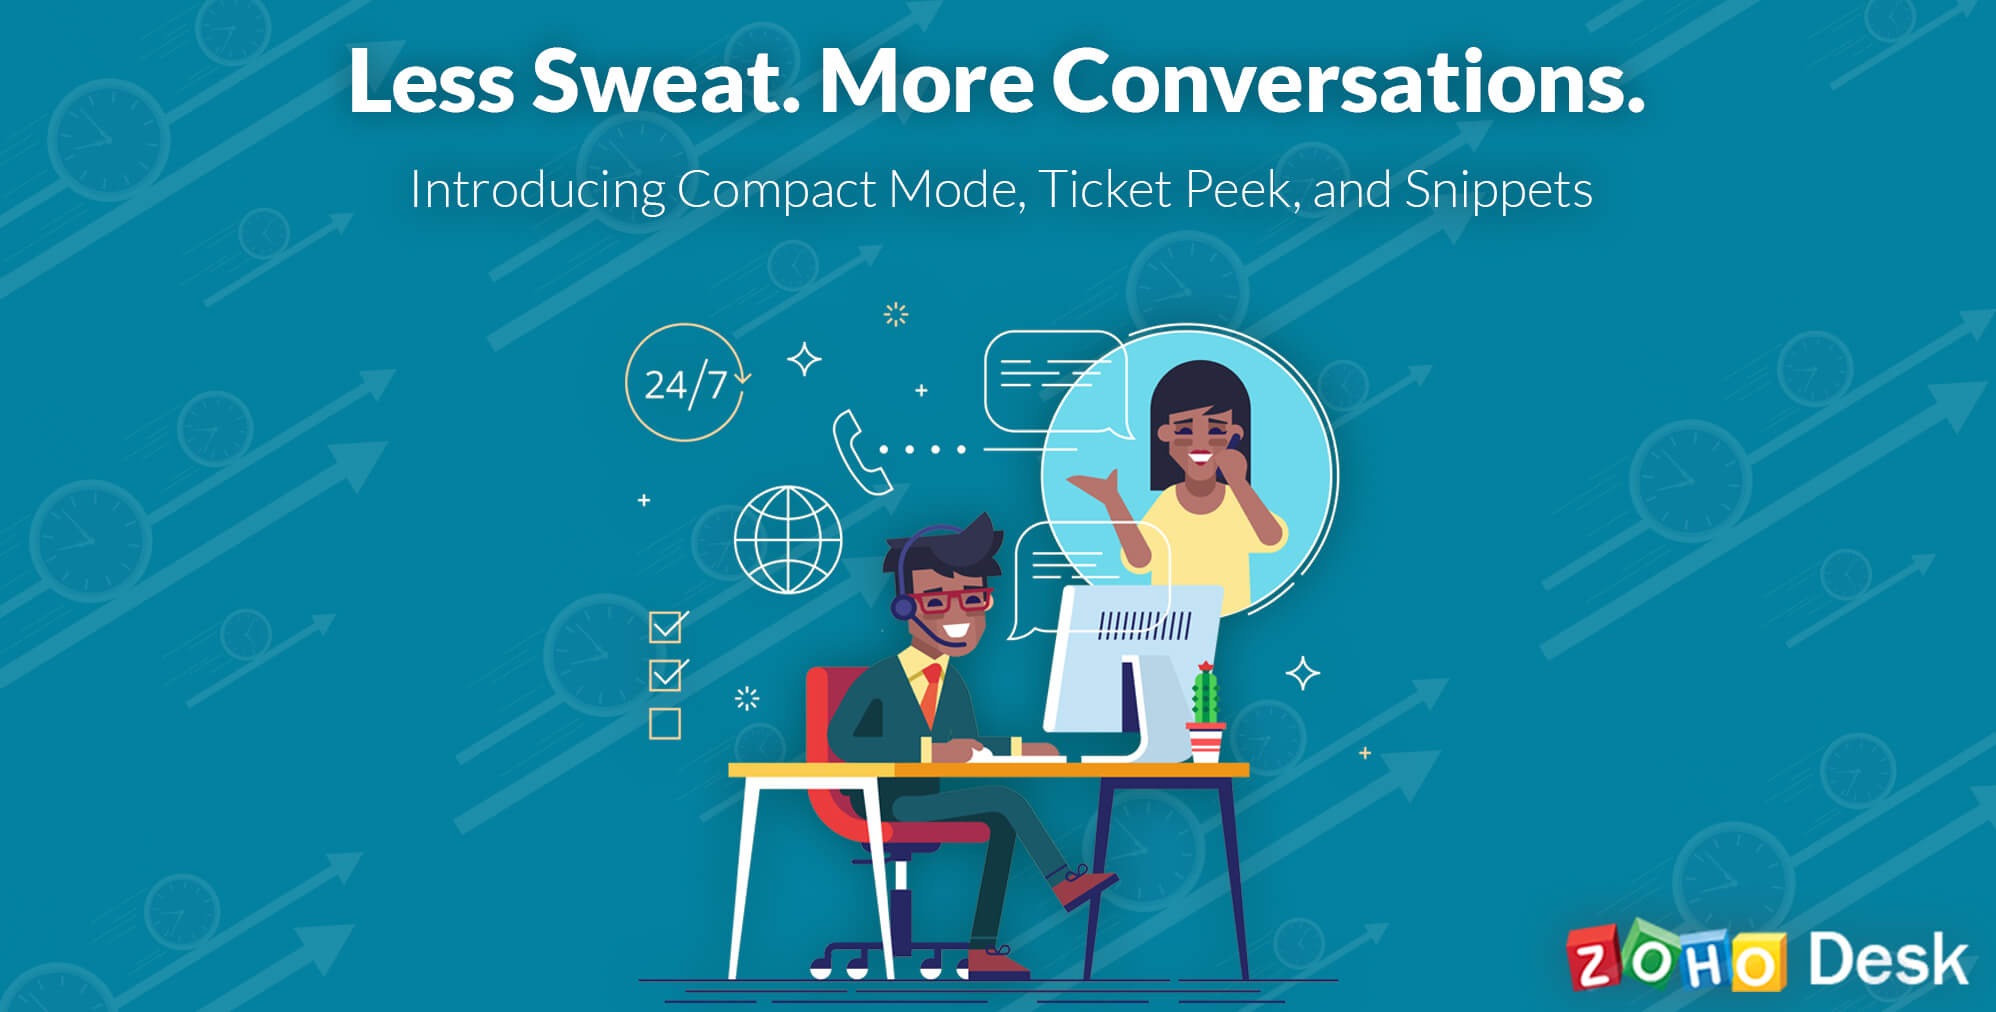 Introducing Compact Mode, Ticket Peek, and Snippets